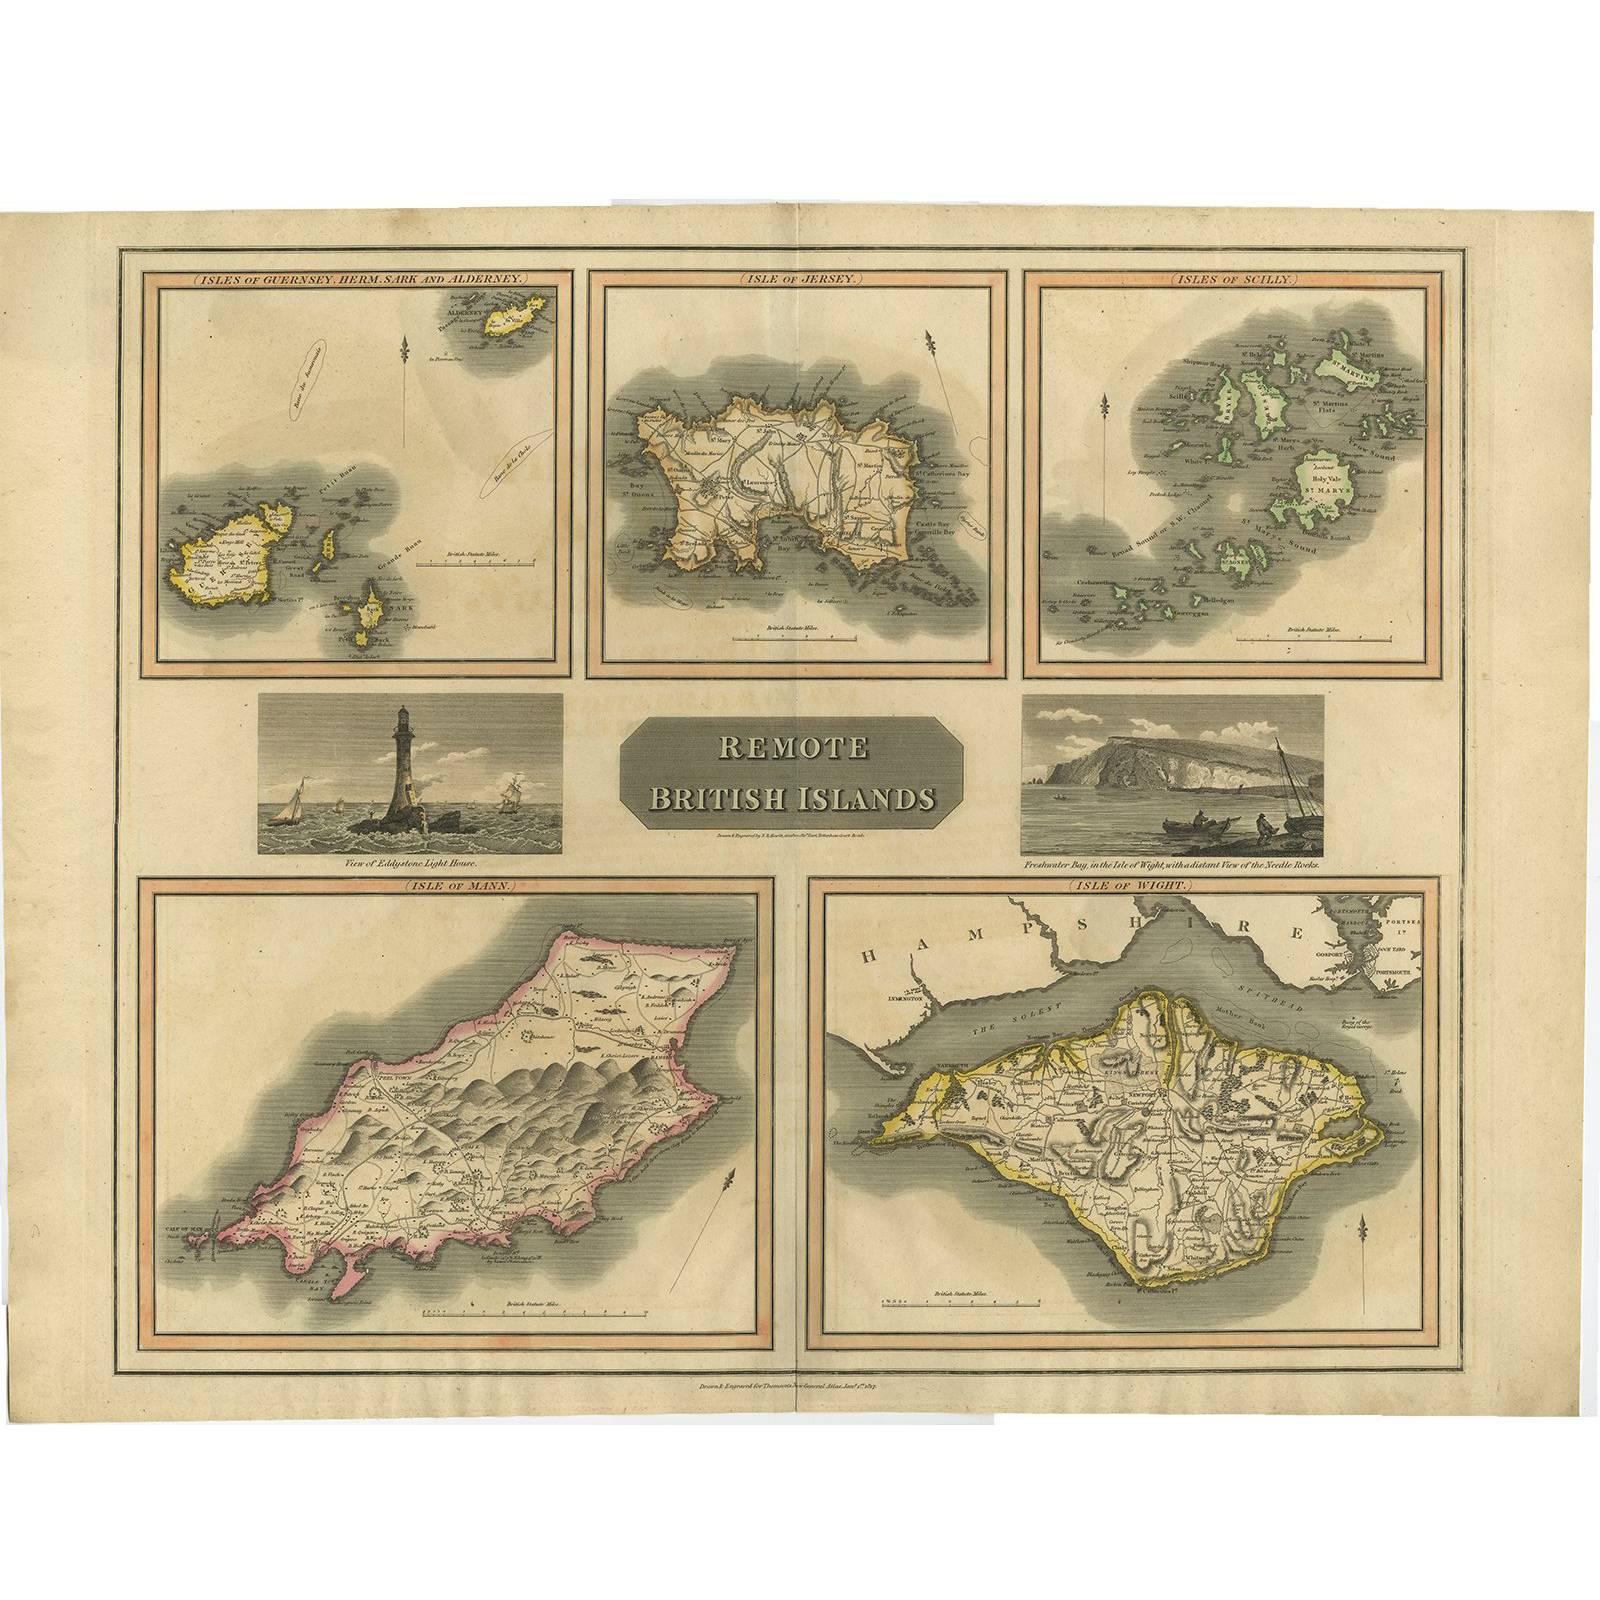 Antique Map of the British Islands by J. Thomson, 1817